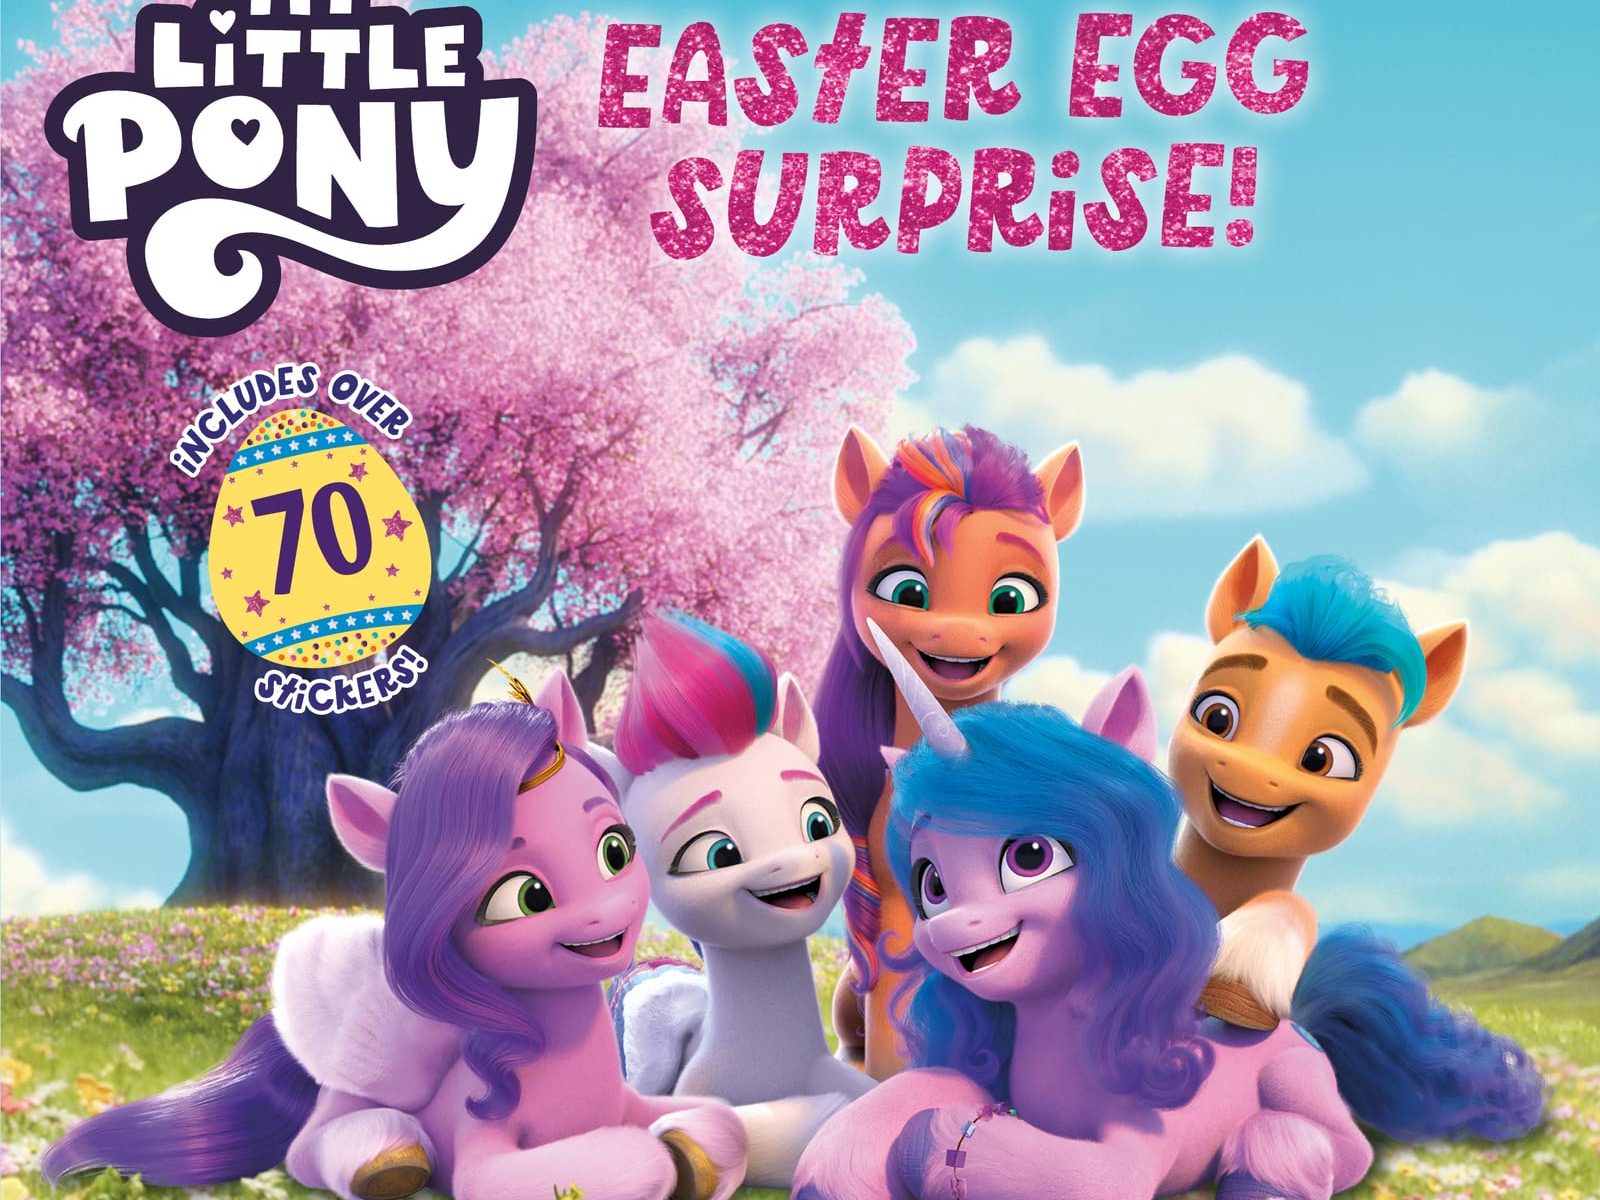 MLP: ANG Easter Egg Surprise! Sticker Book